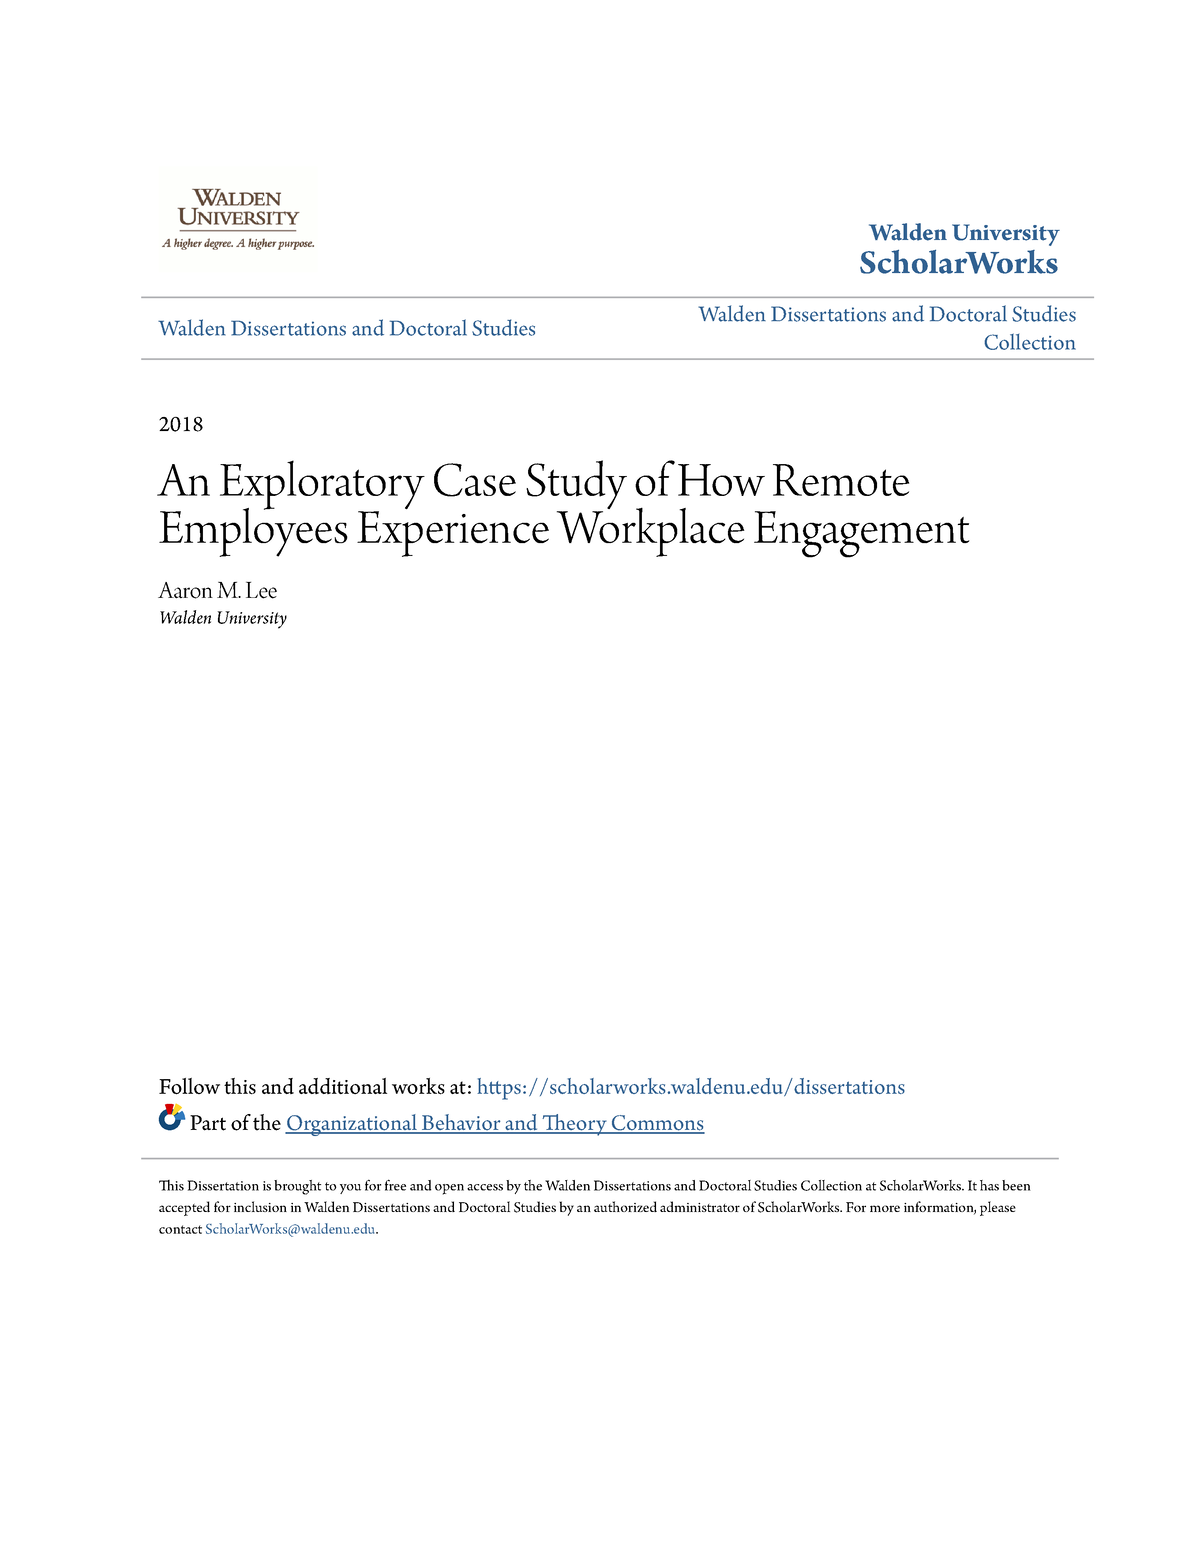 an exploratory case study of how remote employees experience workplace engagement